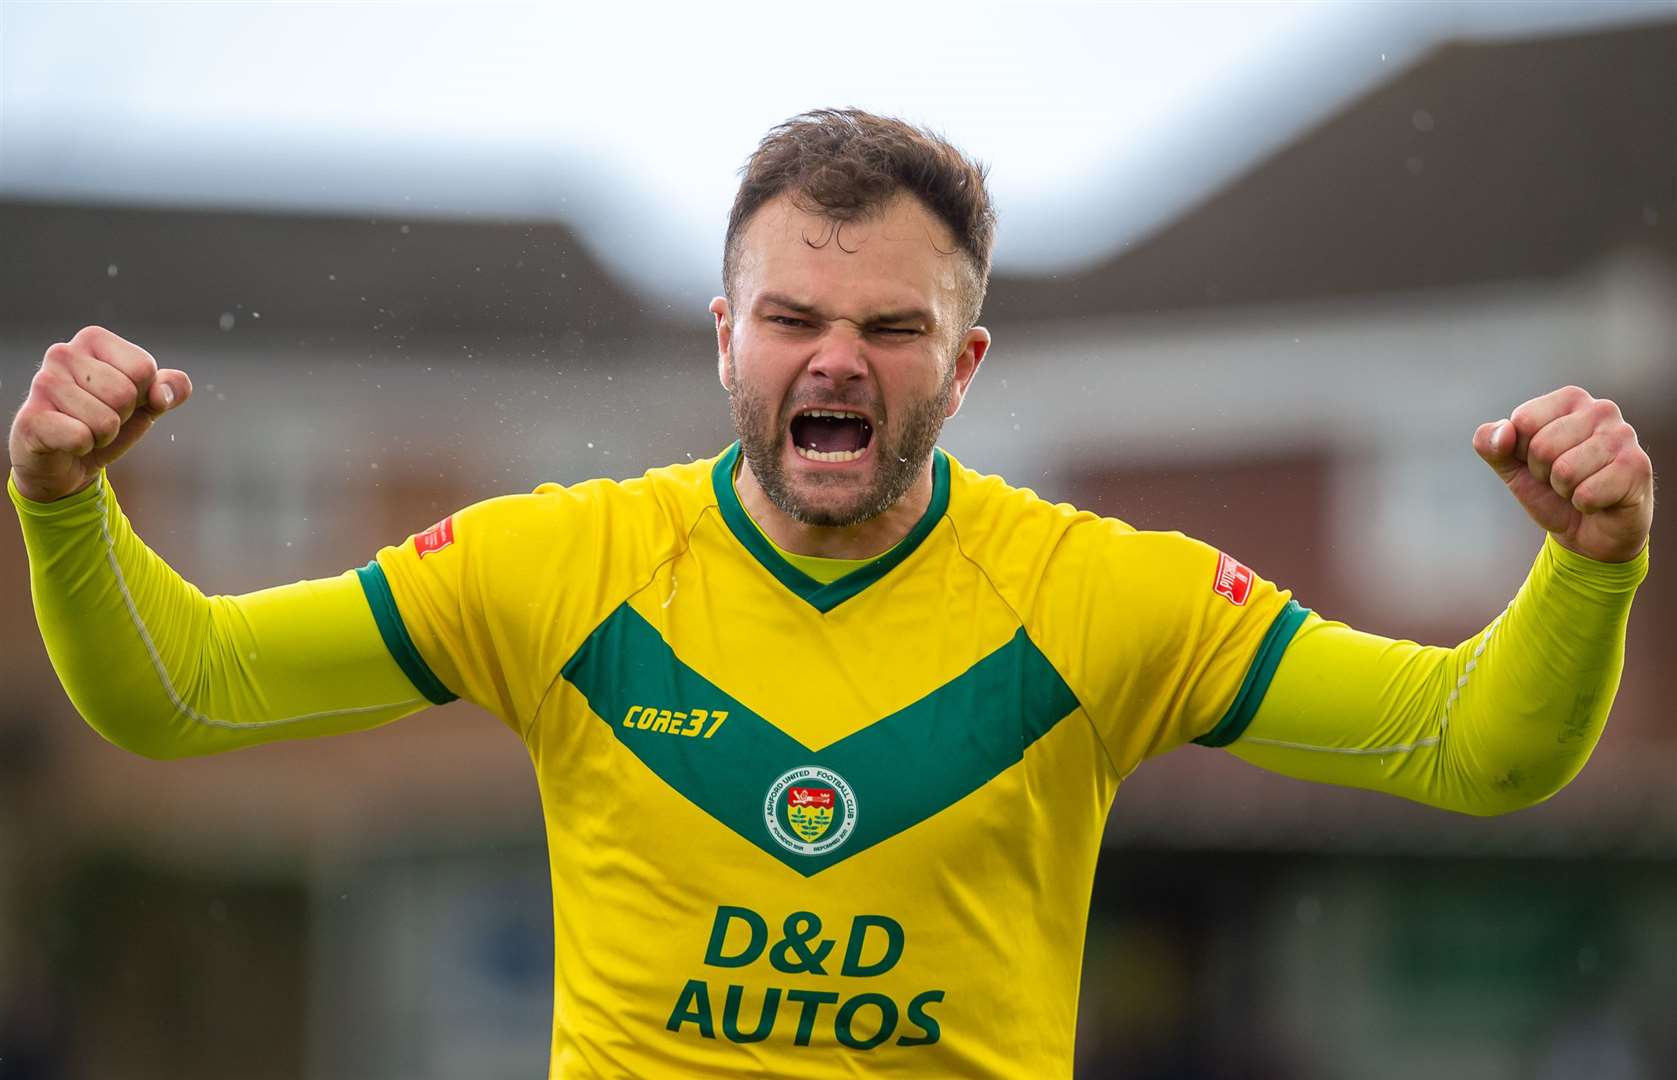 Gary Lockyer impressed after joining Ashford from Kennington and will get his first full campaign with the Nuts & Bolts this season. Picture: Ian Scammell